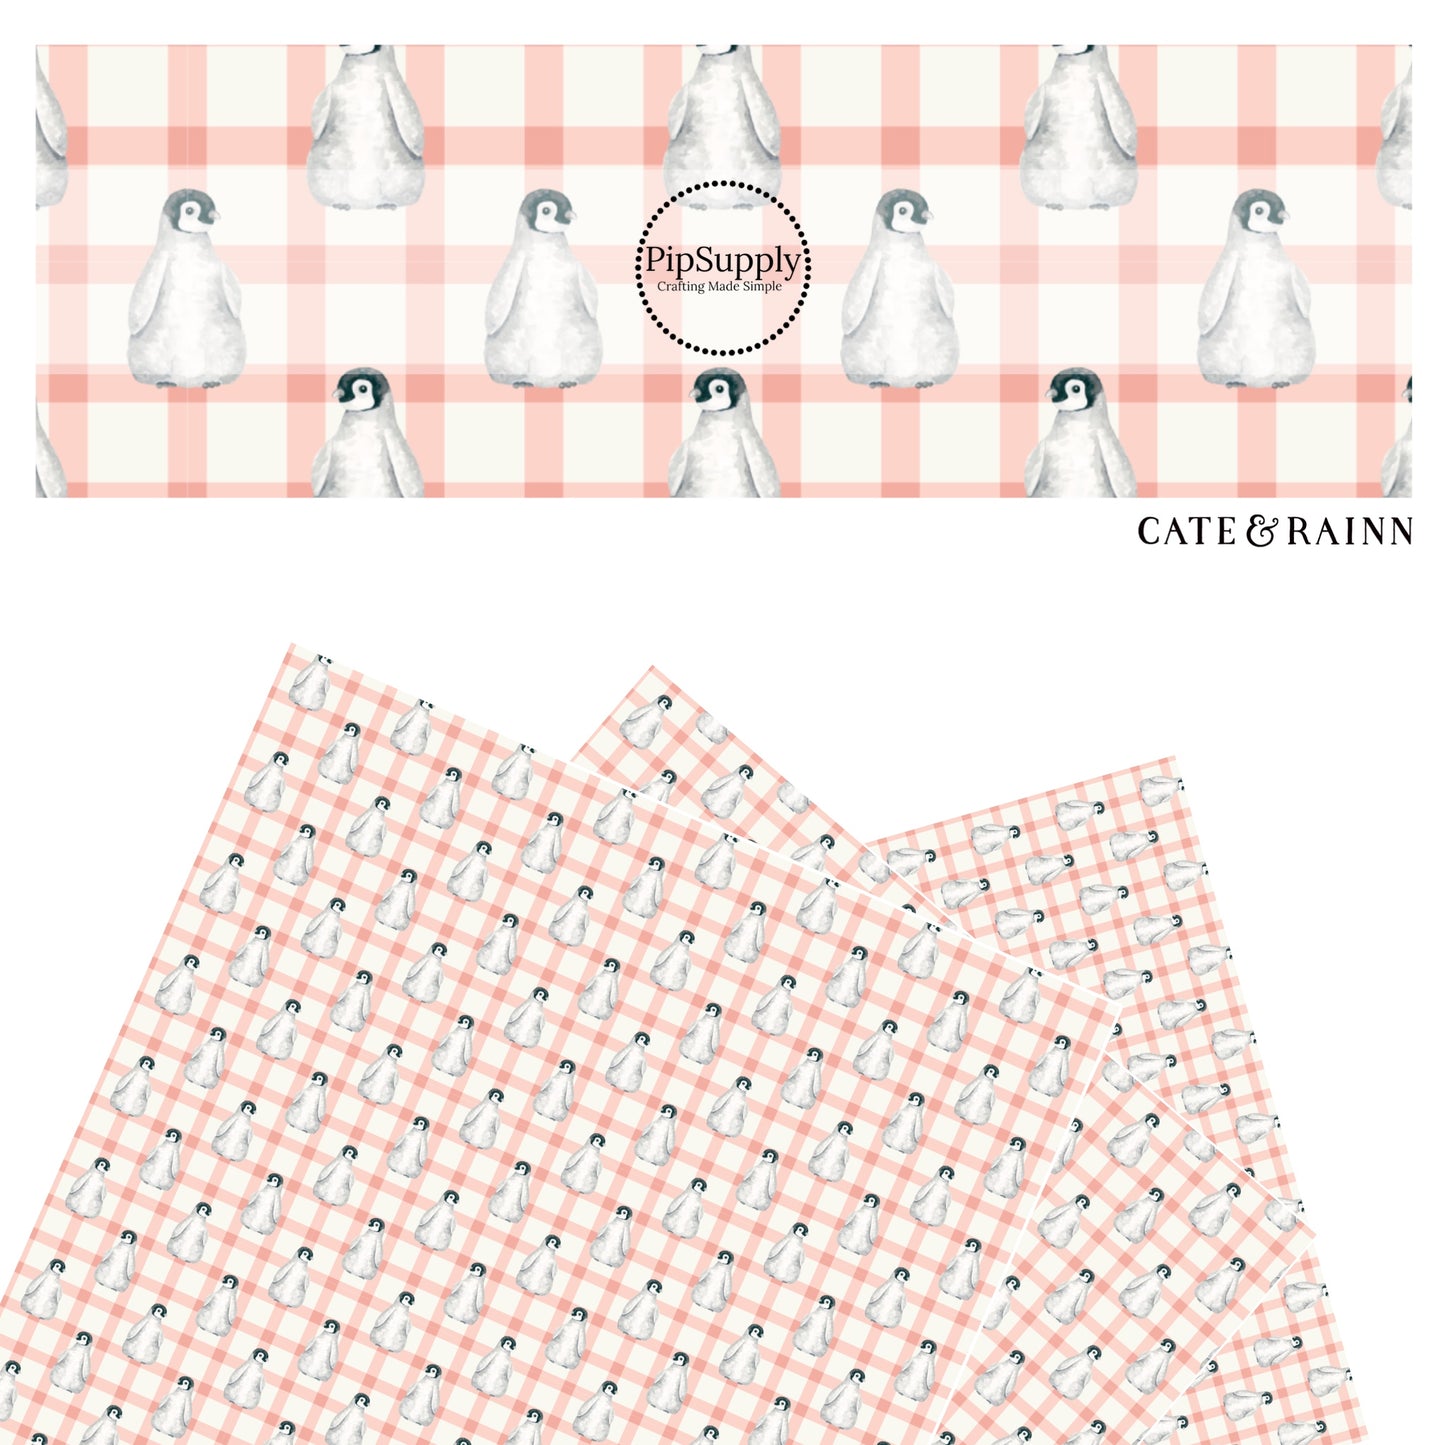 Penguins on peach and white plaid faux leather sheets